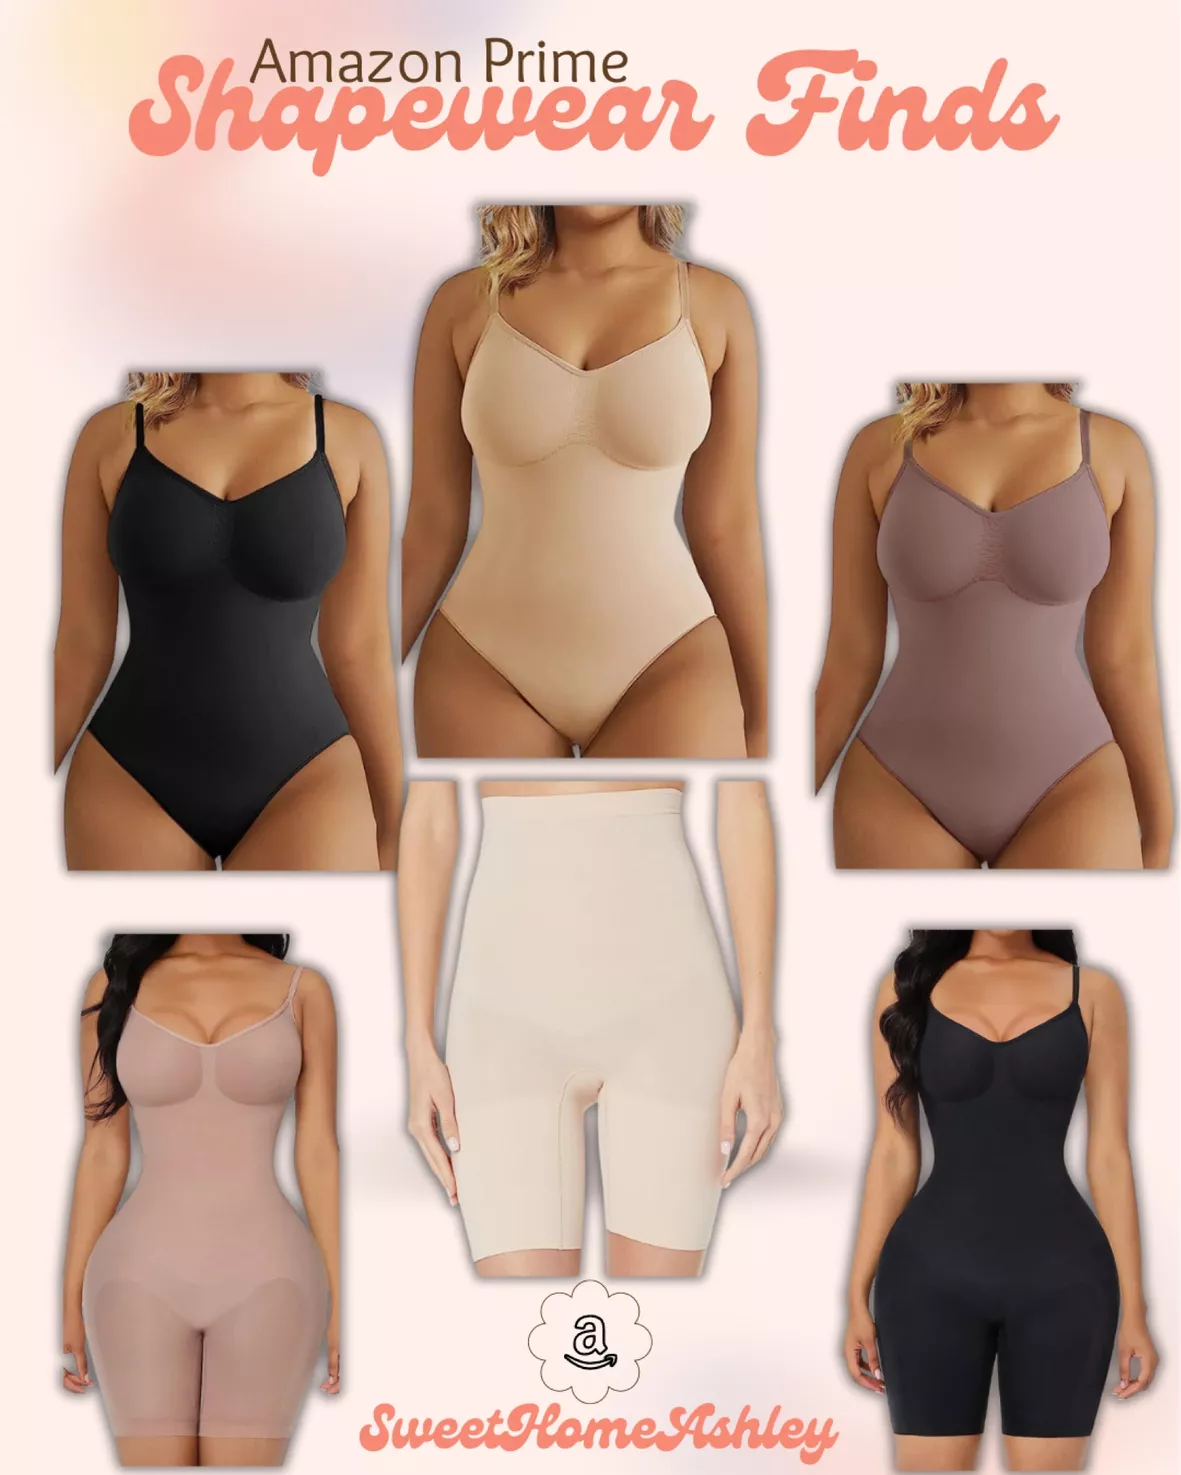 Spanx Power Short, also available extended sizes